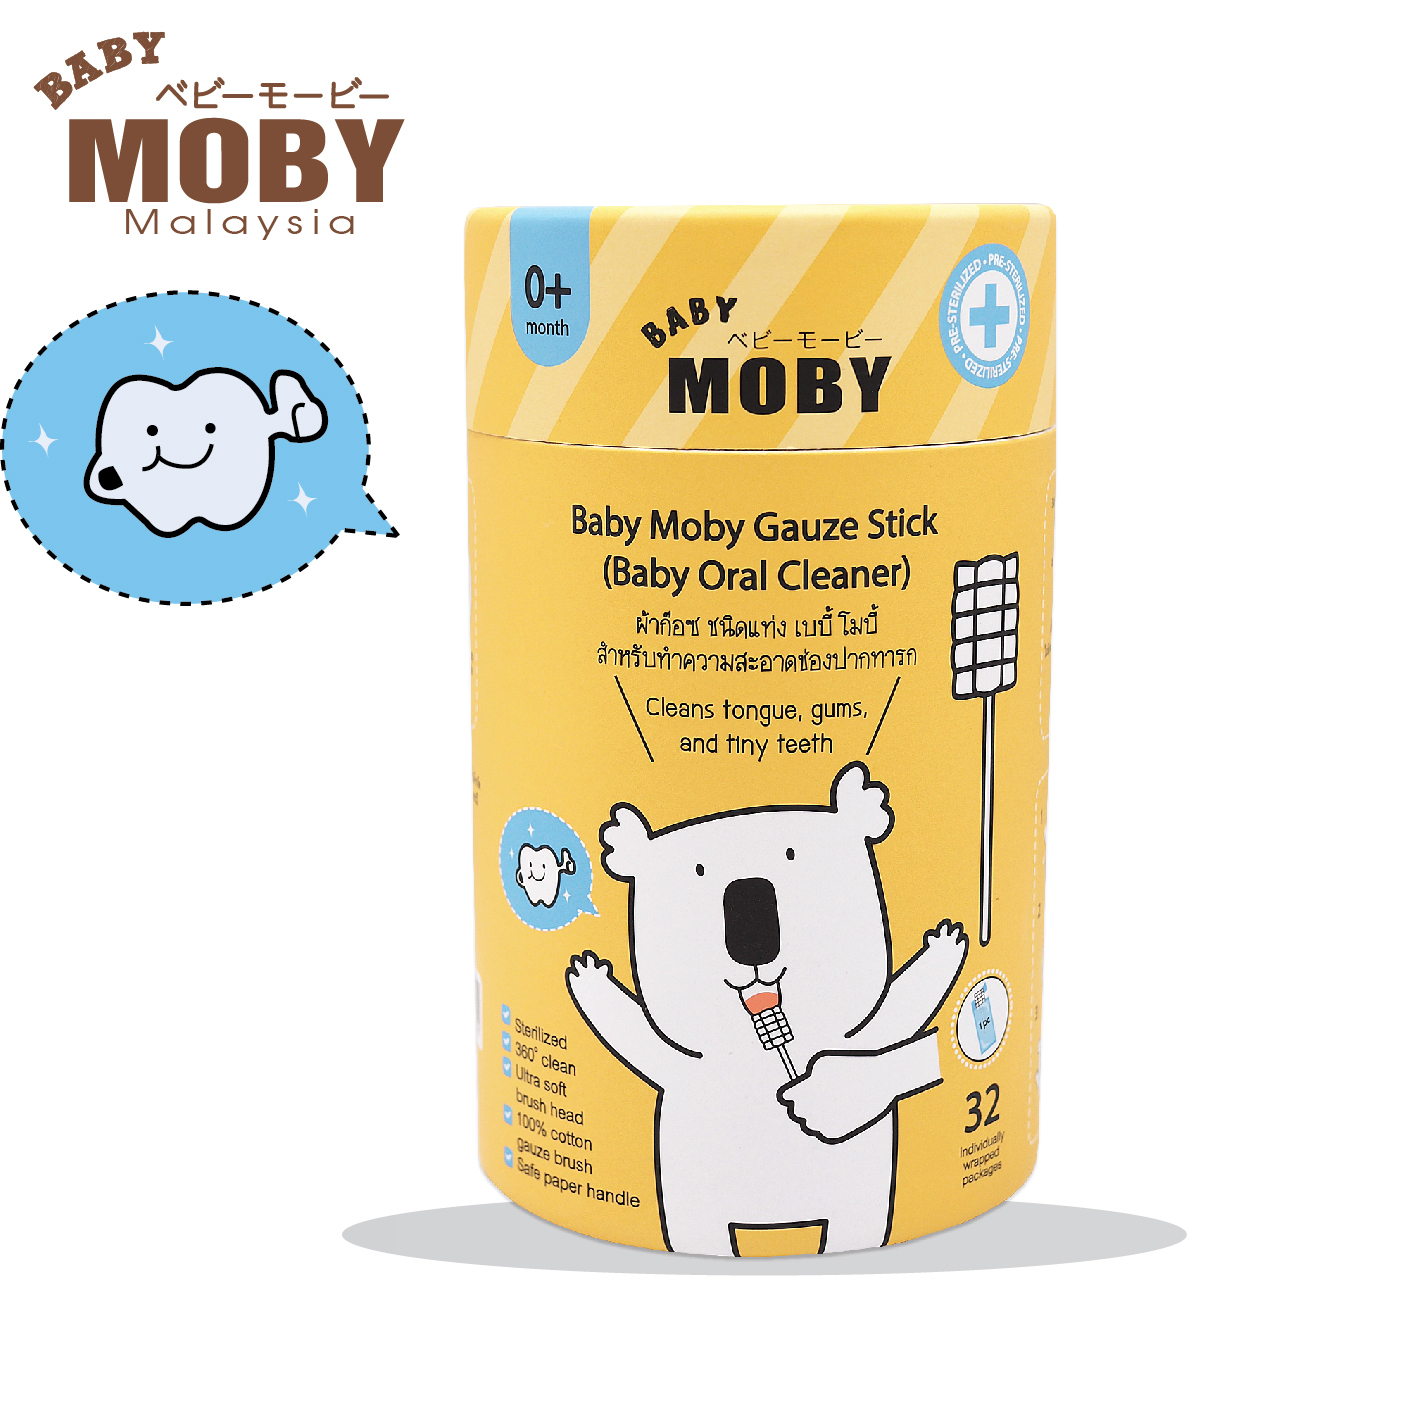 Baby Moby Malaysia